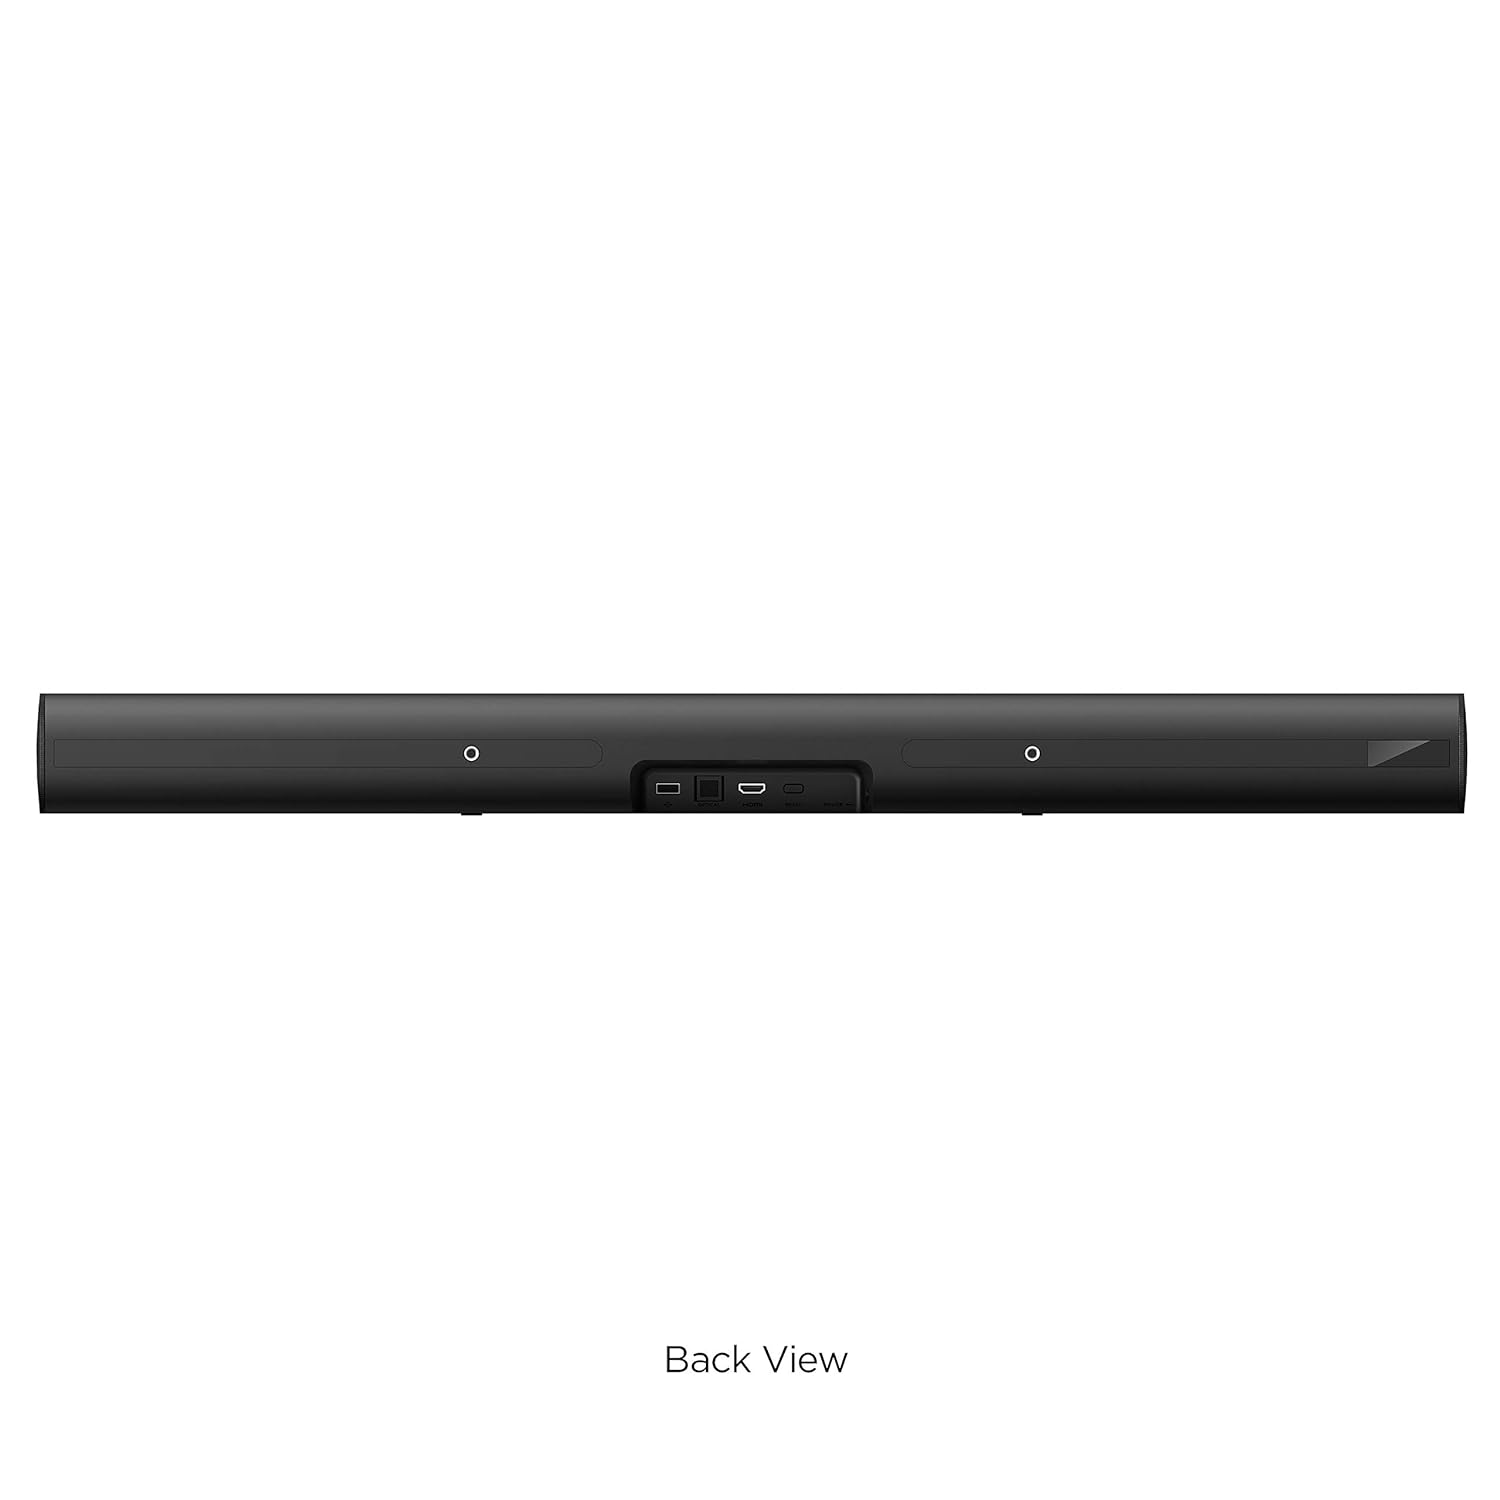 Roku Streambar Pro | 4K/HD/HDR Streaming Media Player & Cinematic Sound, All In One, includes Roku Voice Remote with Headphone Jack for Private Listening, Personal Shortcut Buttons, and TV Controls